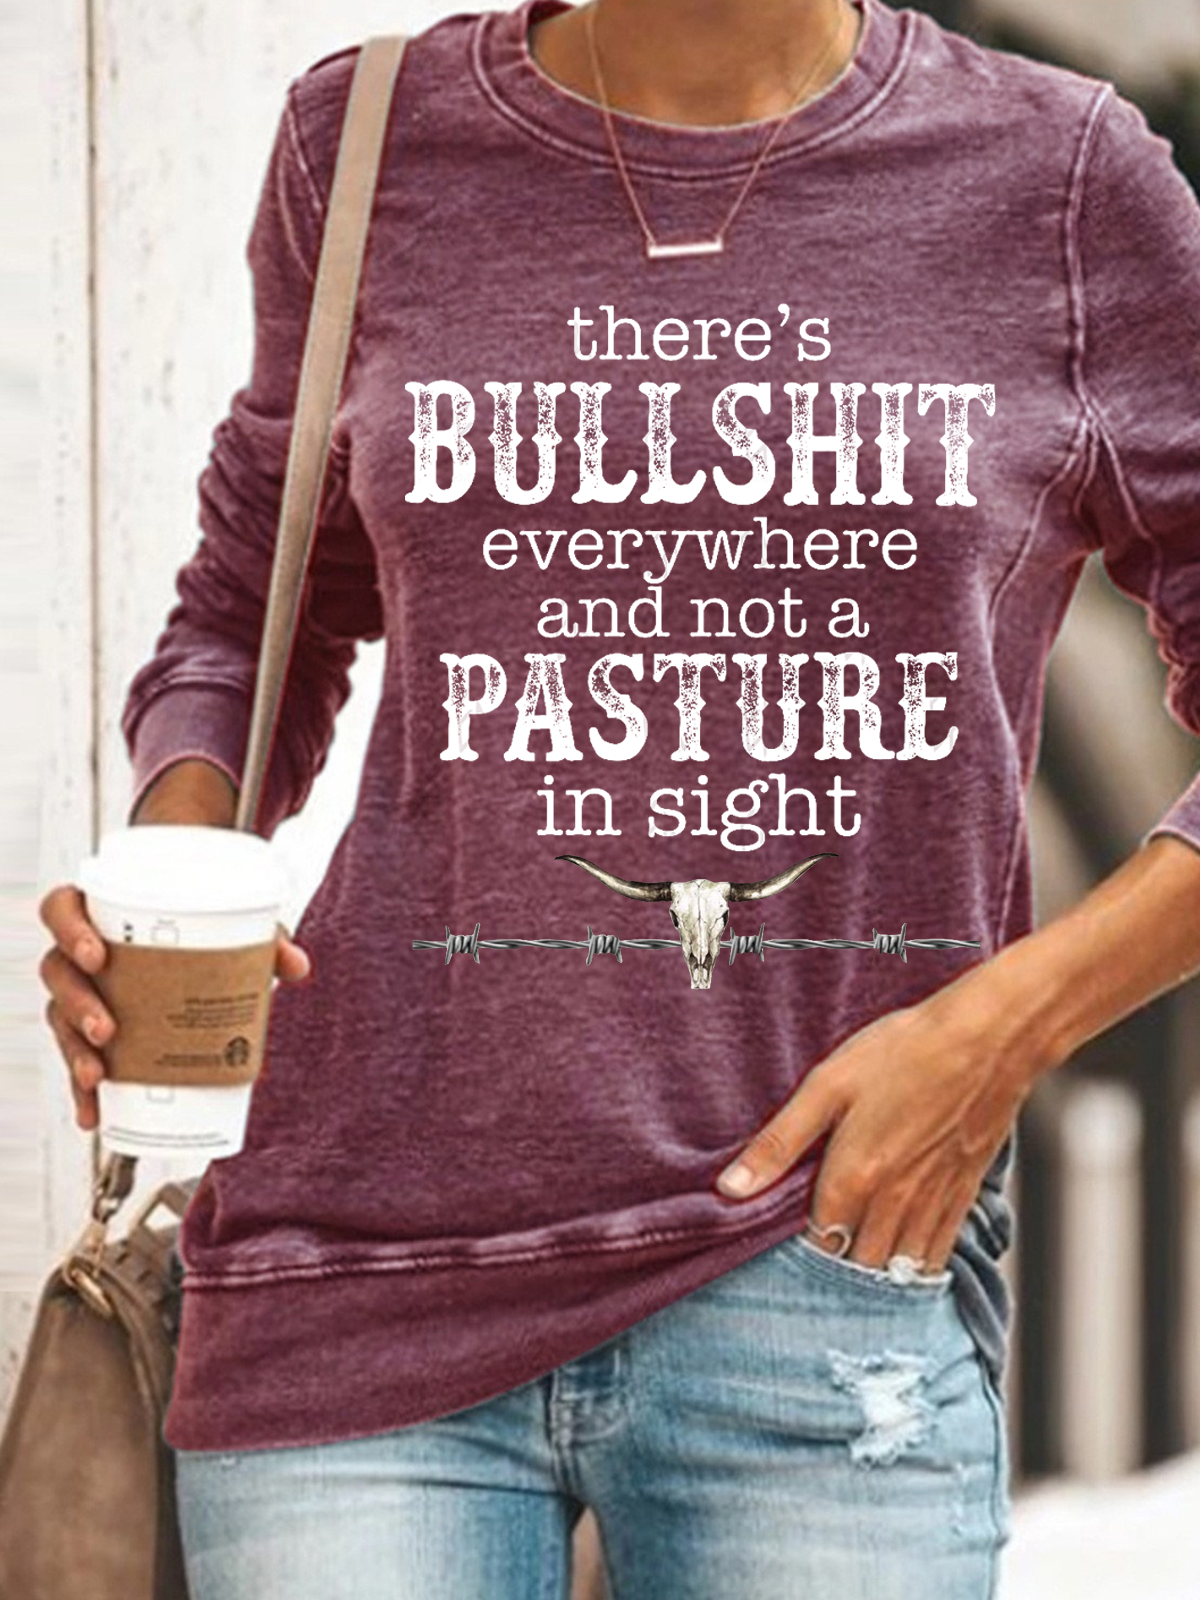 Women's Bull Everywhere And Not A Pasture In Sight Casual Cotton-Blend Sweatshirt